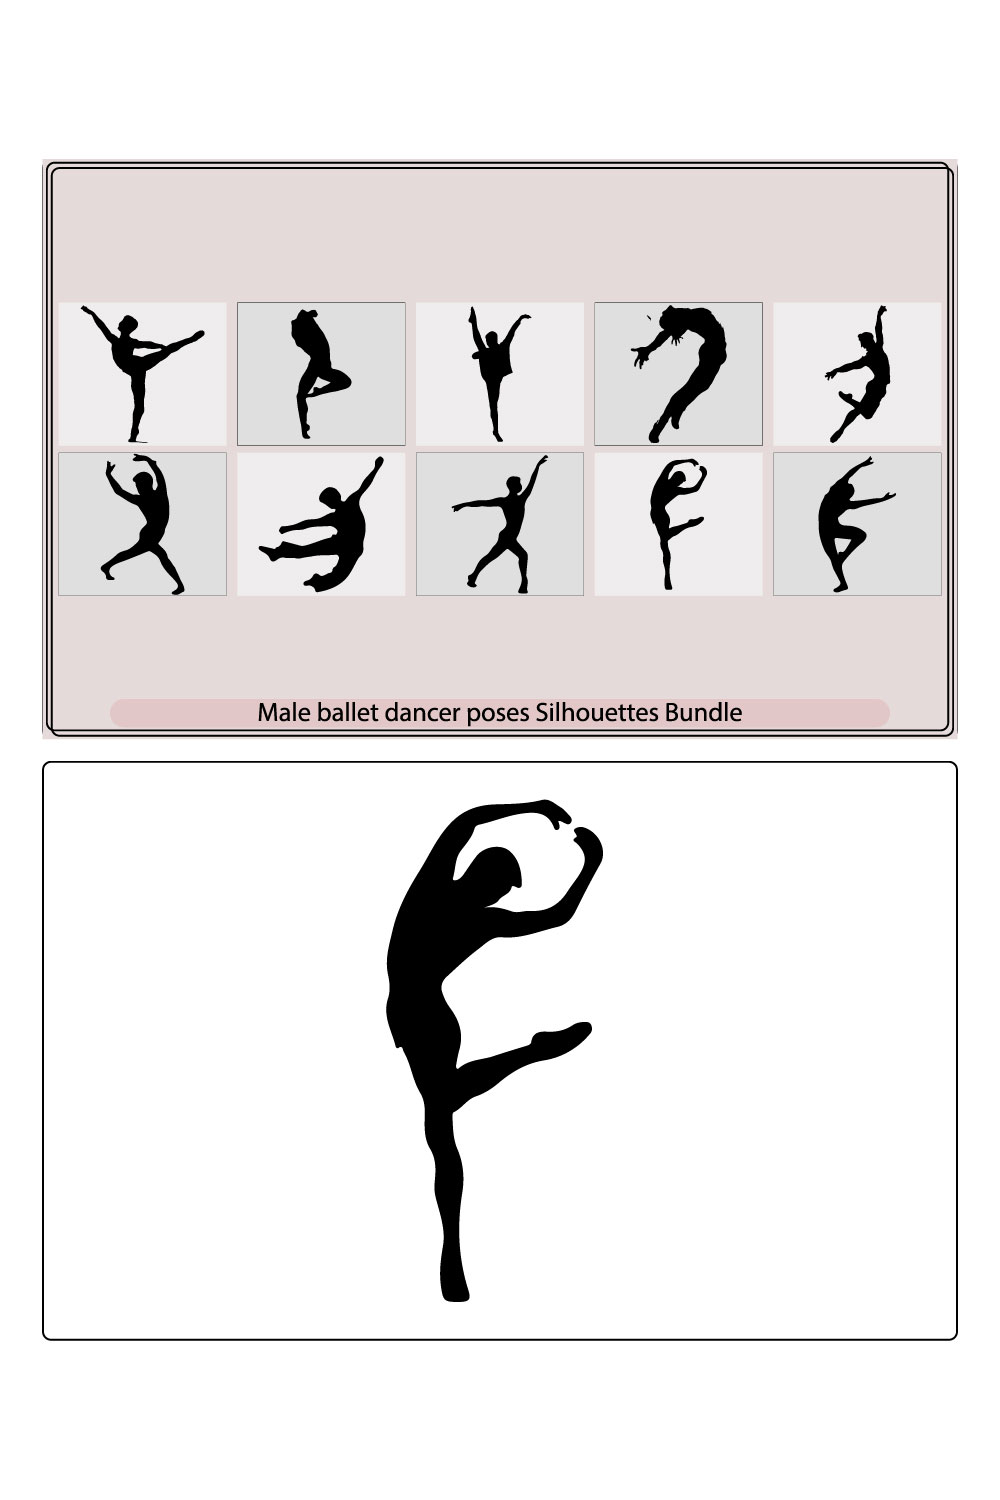 Ballerina Pose Silhouette Vector PNG, Ballerina Girl Dancing Pose,  Ballerina, Silhouette, Pose PNG Image For Free Download